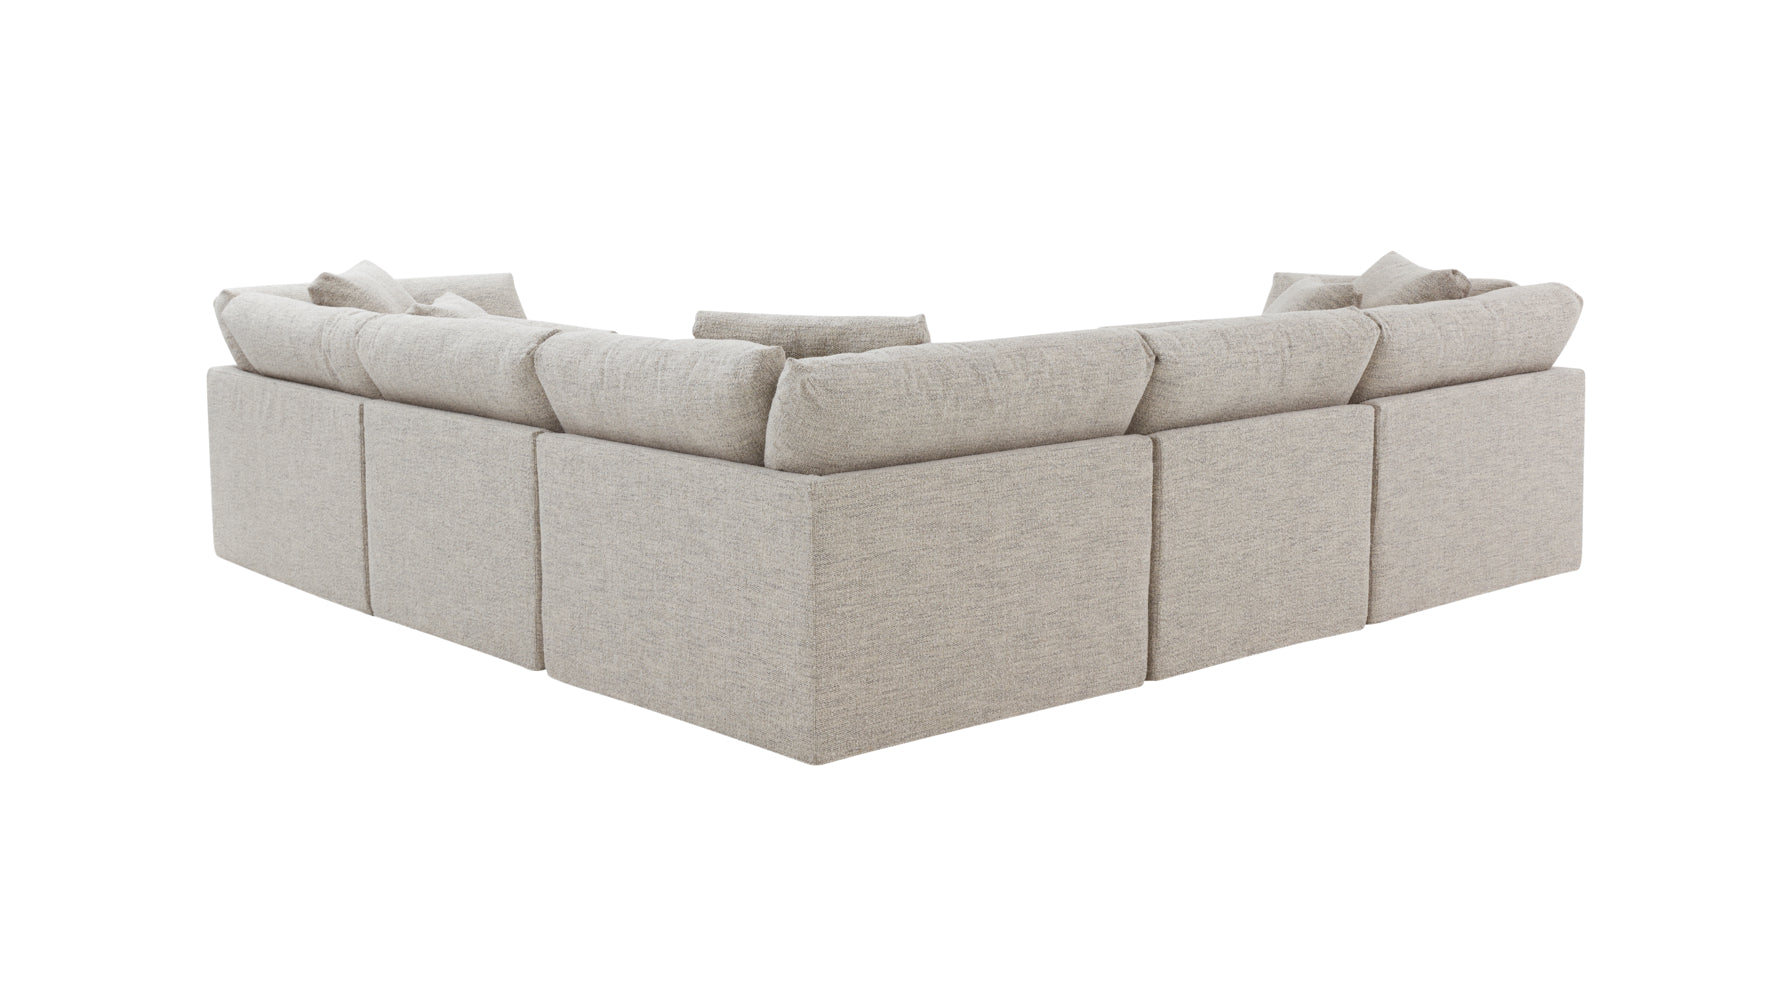 Get Together™ 5-Piece Modular Sectional Closed, Large, Oatmeal - Image 7